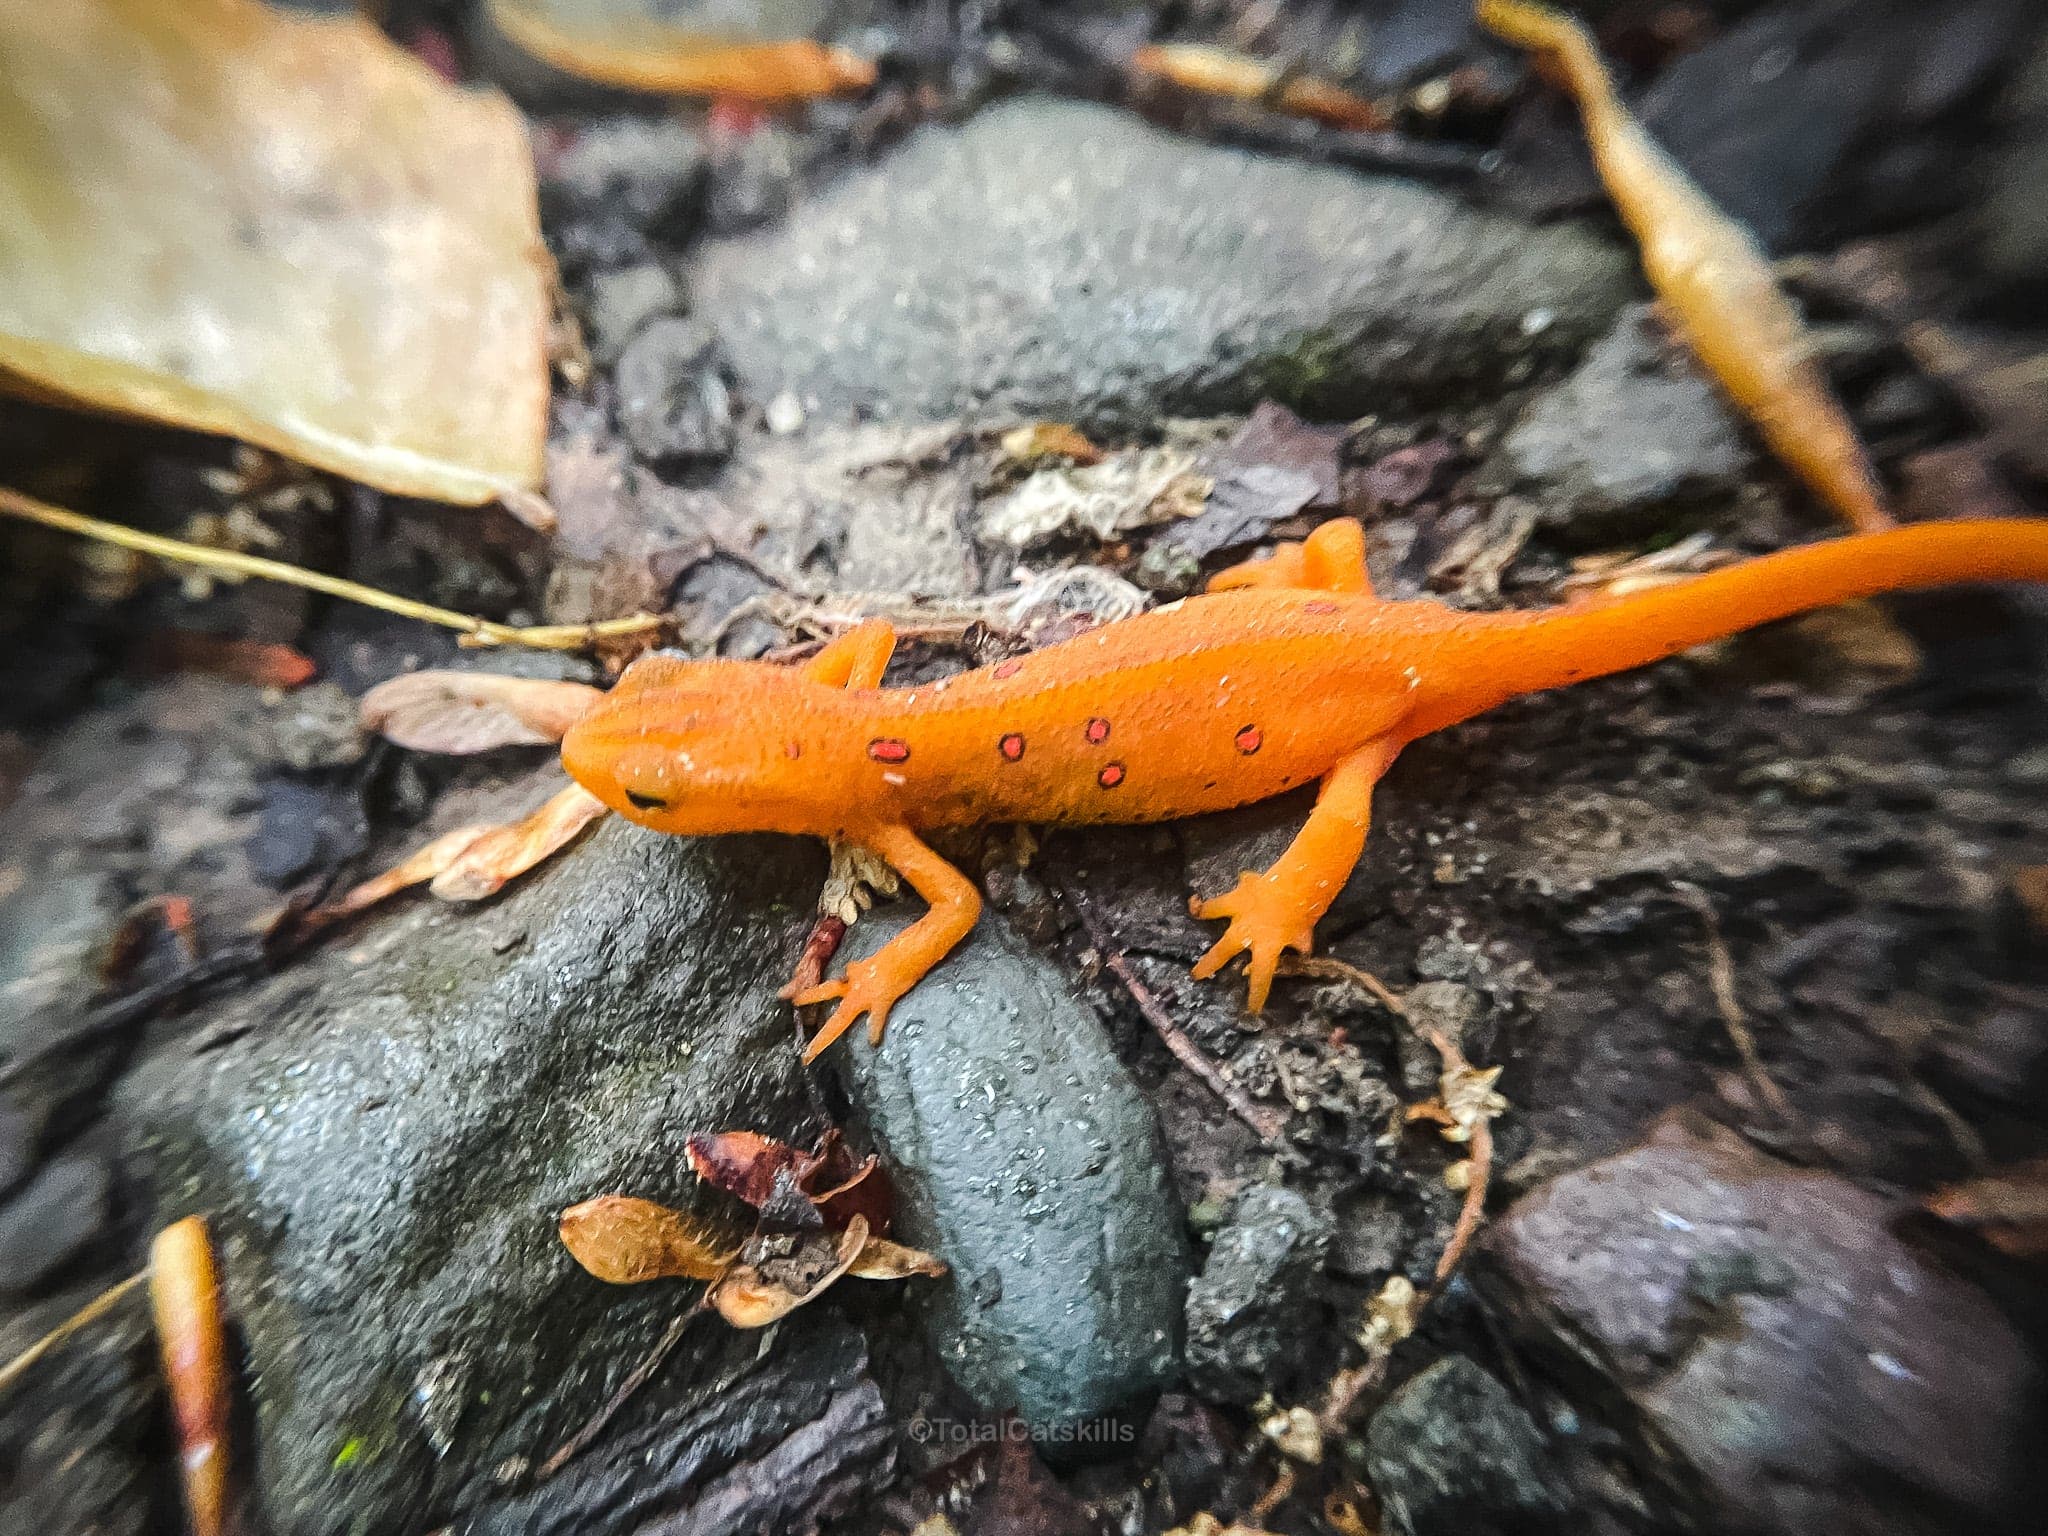 red eft sitting among stones on wet hiking trail